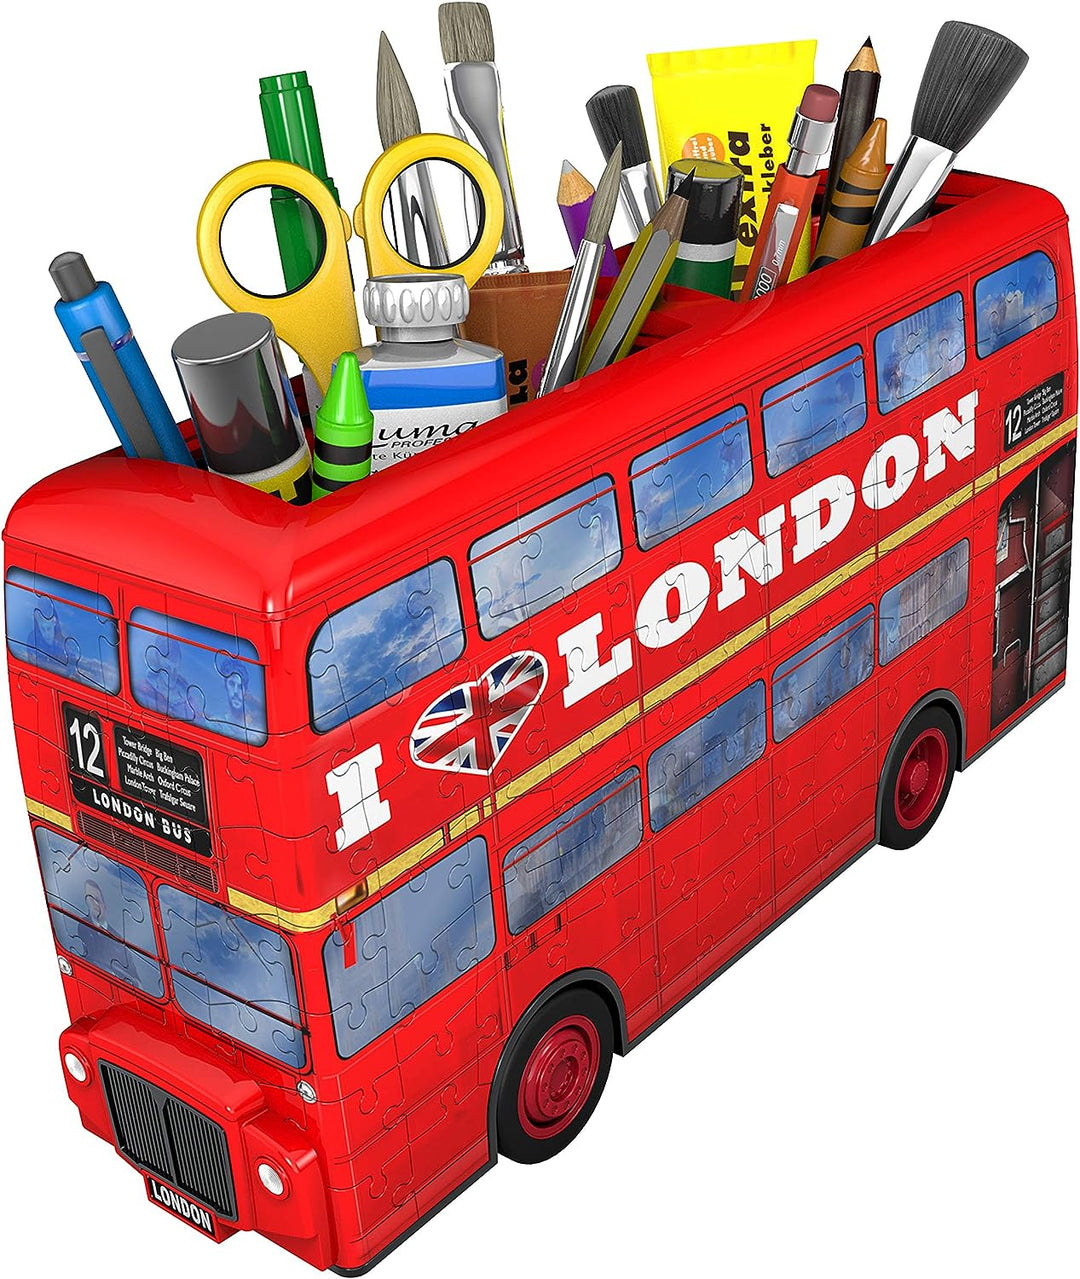 Ravensburger Red London Bus 3D Jigsaw Puzzle for Kids Age 8 Years Up - 216 Pieces